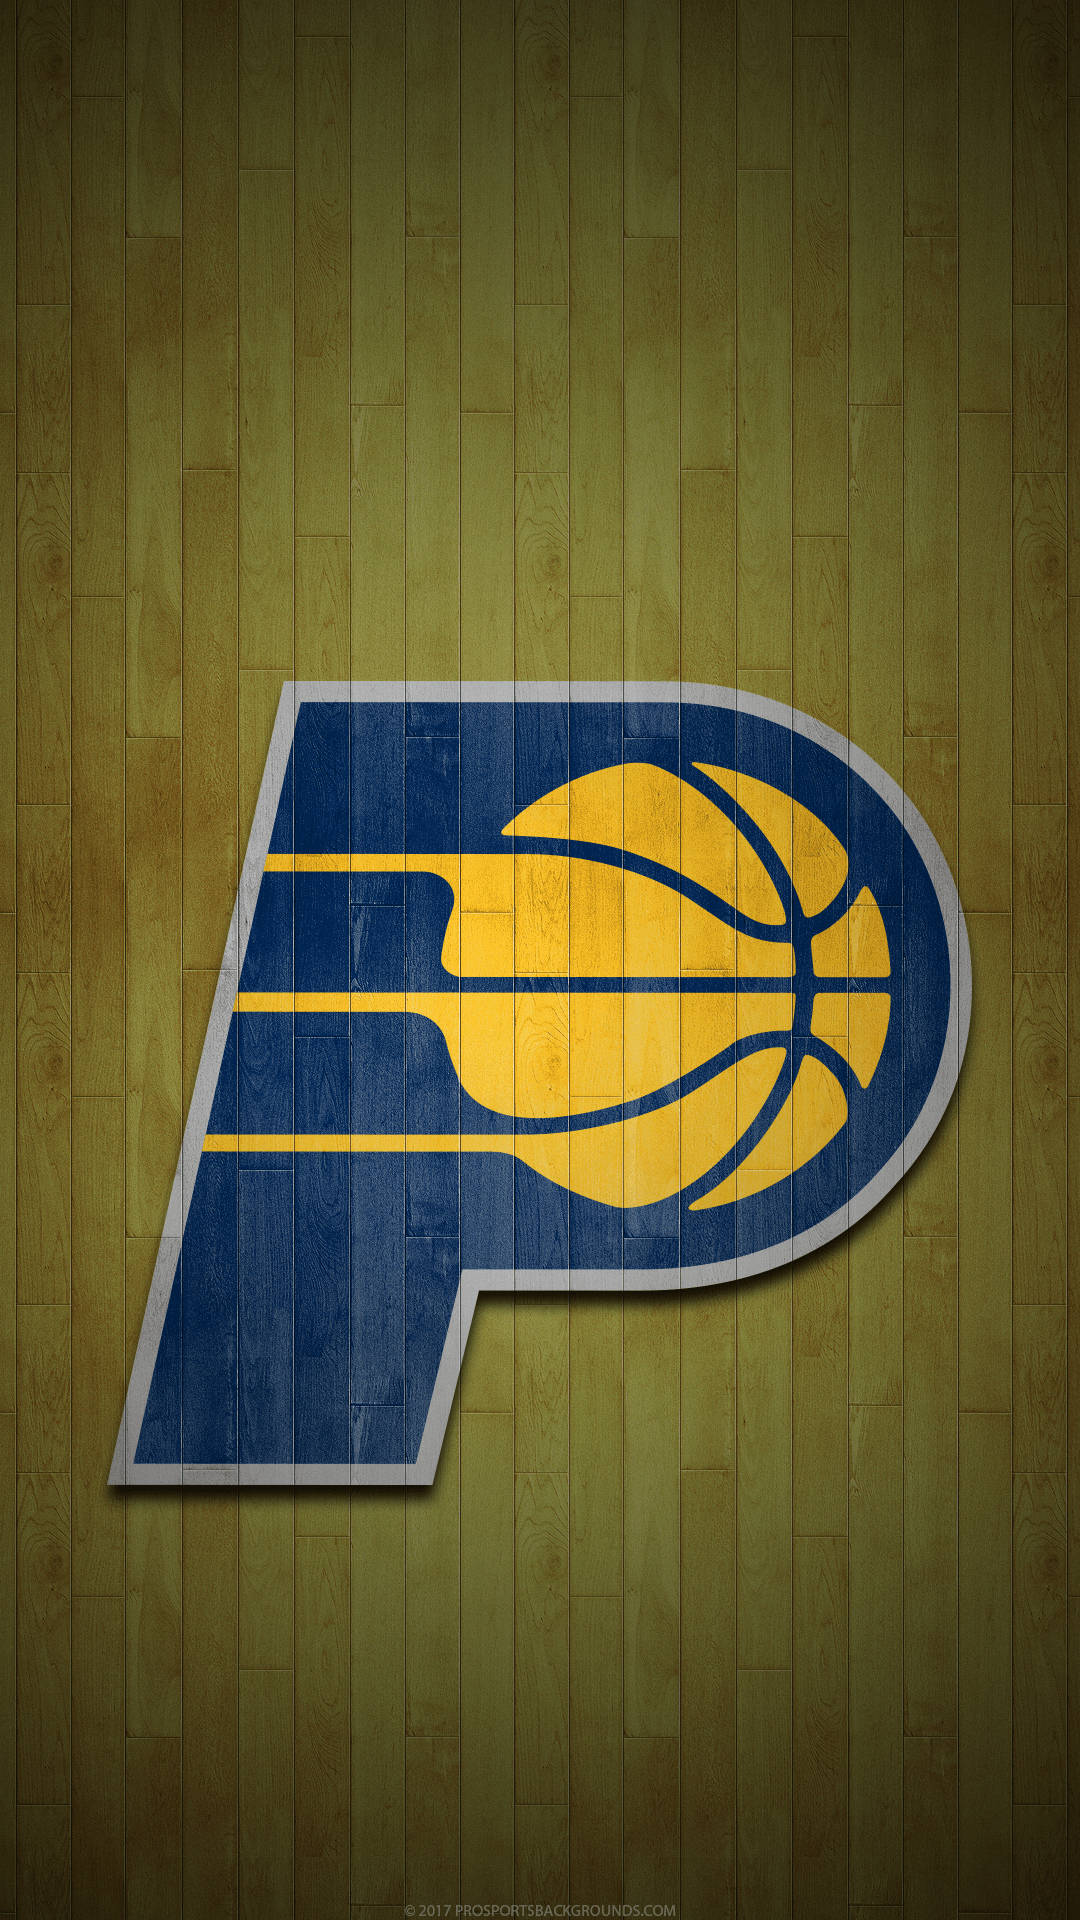 Indiana Pacers classic wooden logo wallpaper